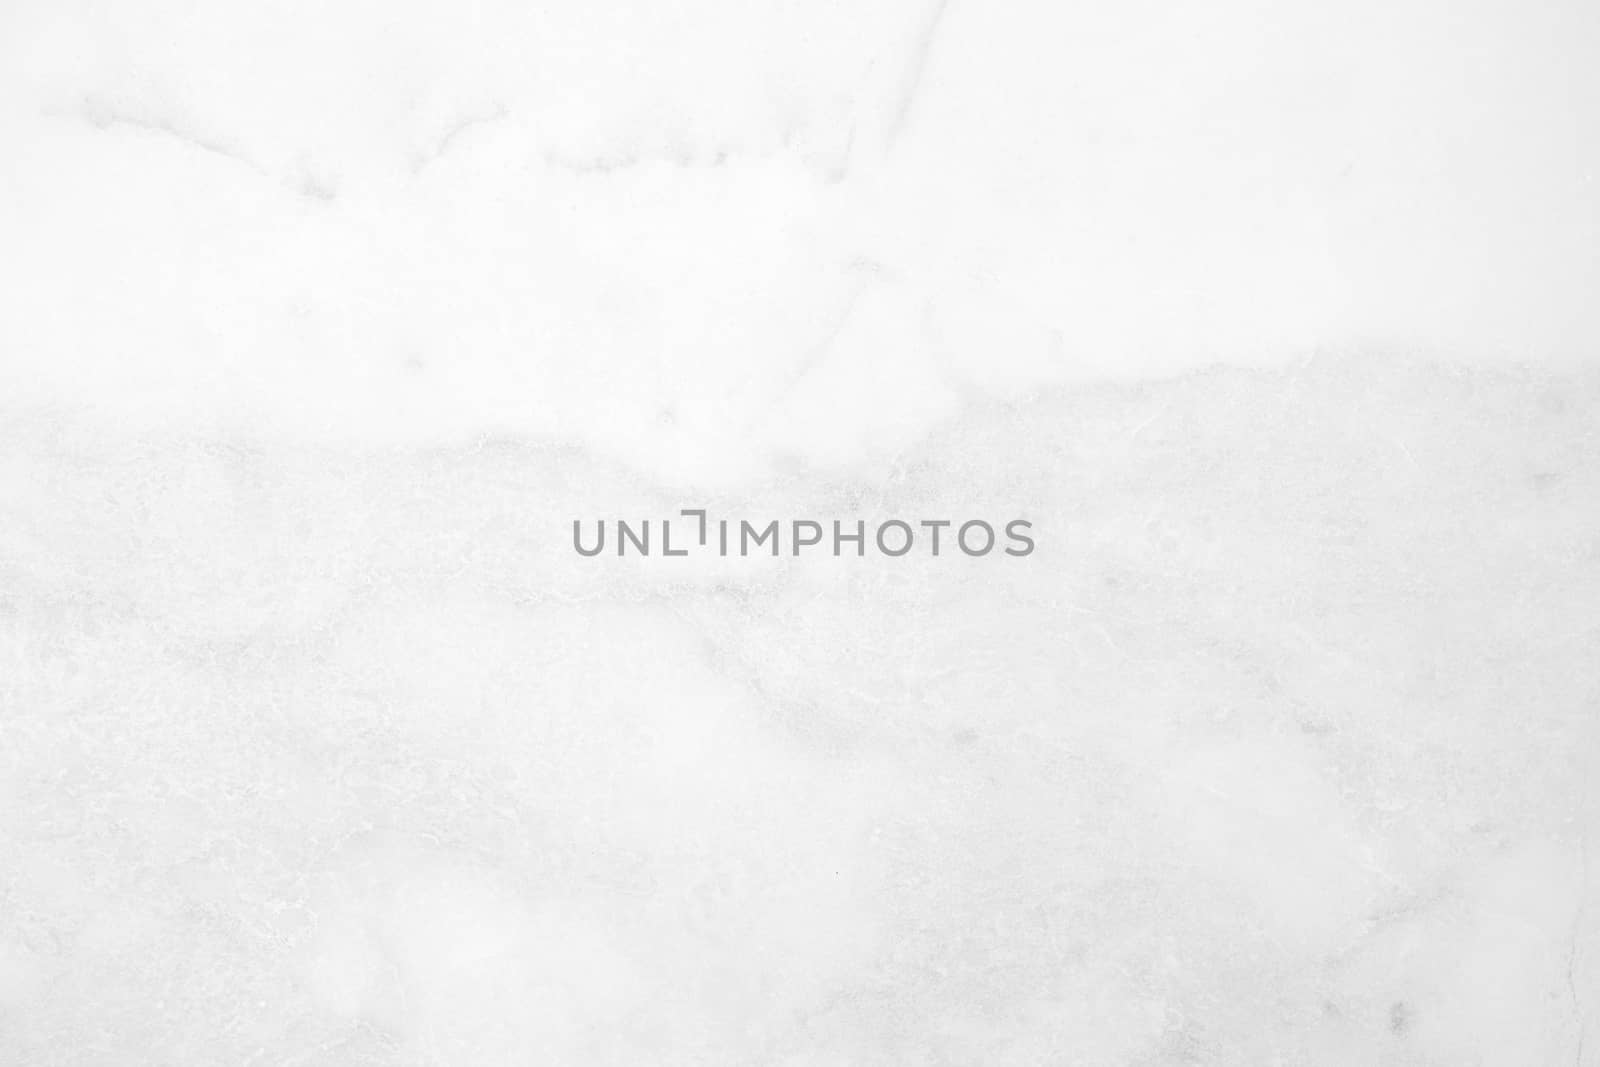 White Marble Wall Texture Background. by mesamong